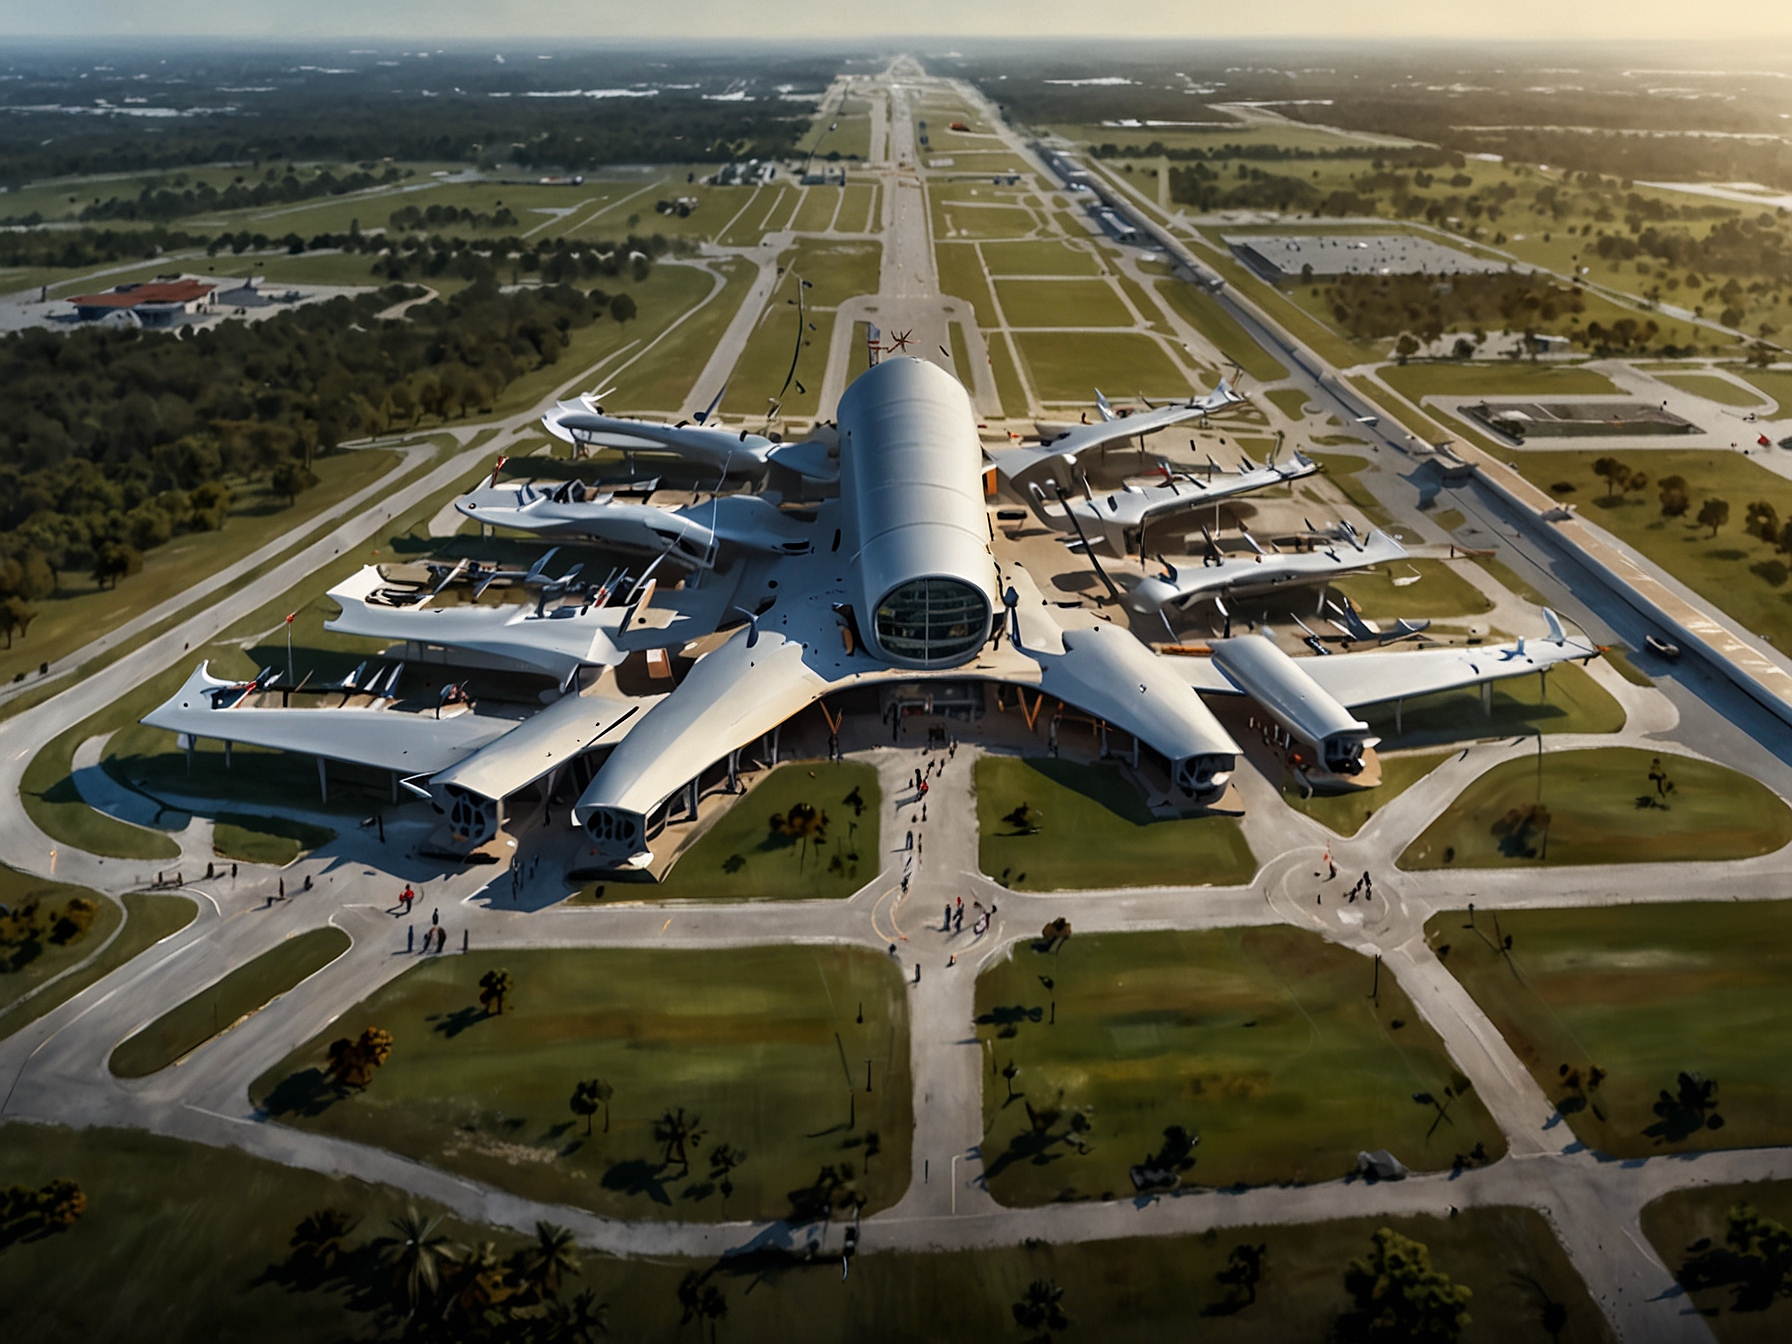 An aerial view of the proposed $300 million airport in a rural part of Florida, highlighting the large-scale construction and potential for economic transformation in the region.